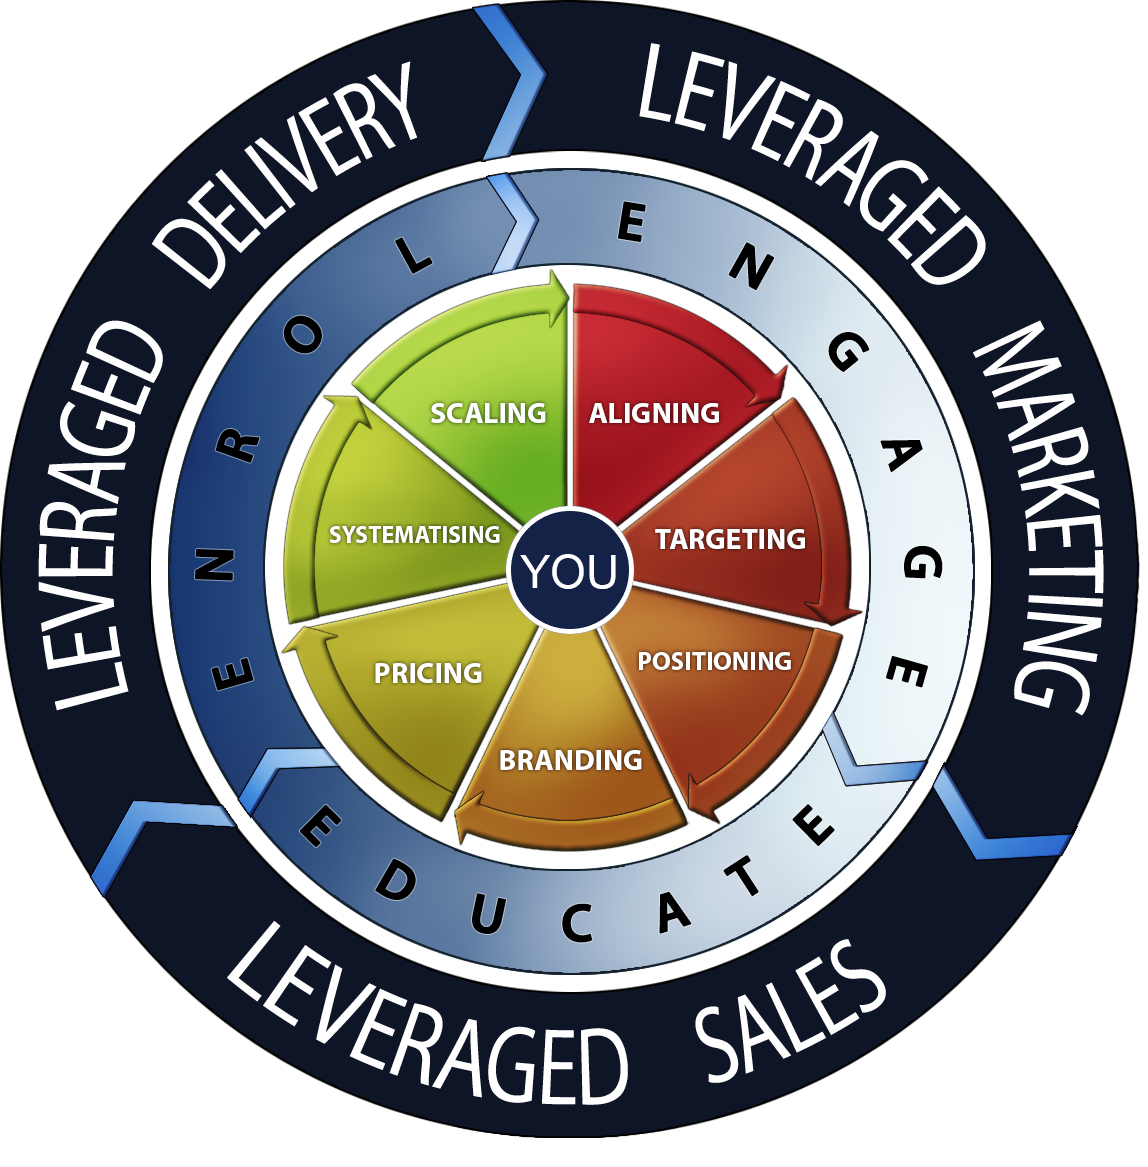 Leveraged Business iSuccess accelerator model improve business performance and build a thriving service business